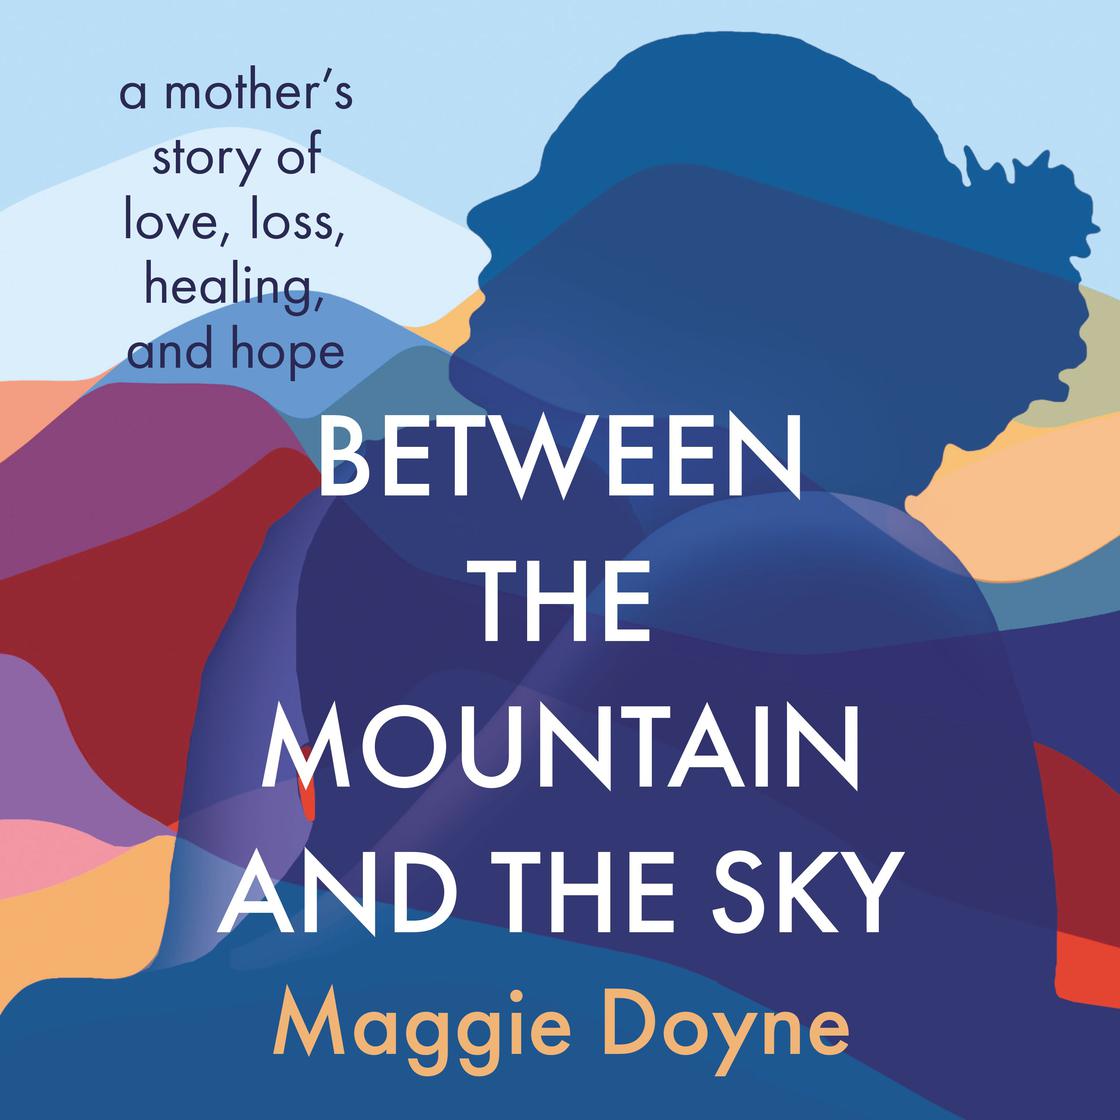 Between the Mountain and the Sky, A Mother's Story of Love, Loss, Healing, and Hope, by Maggie Doyne